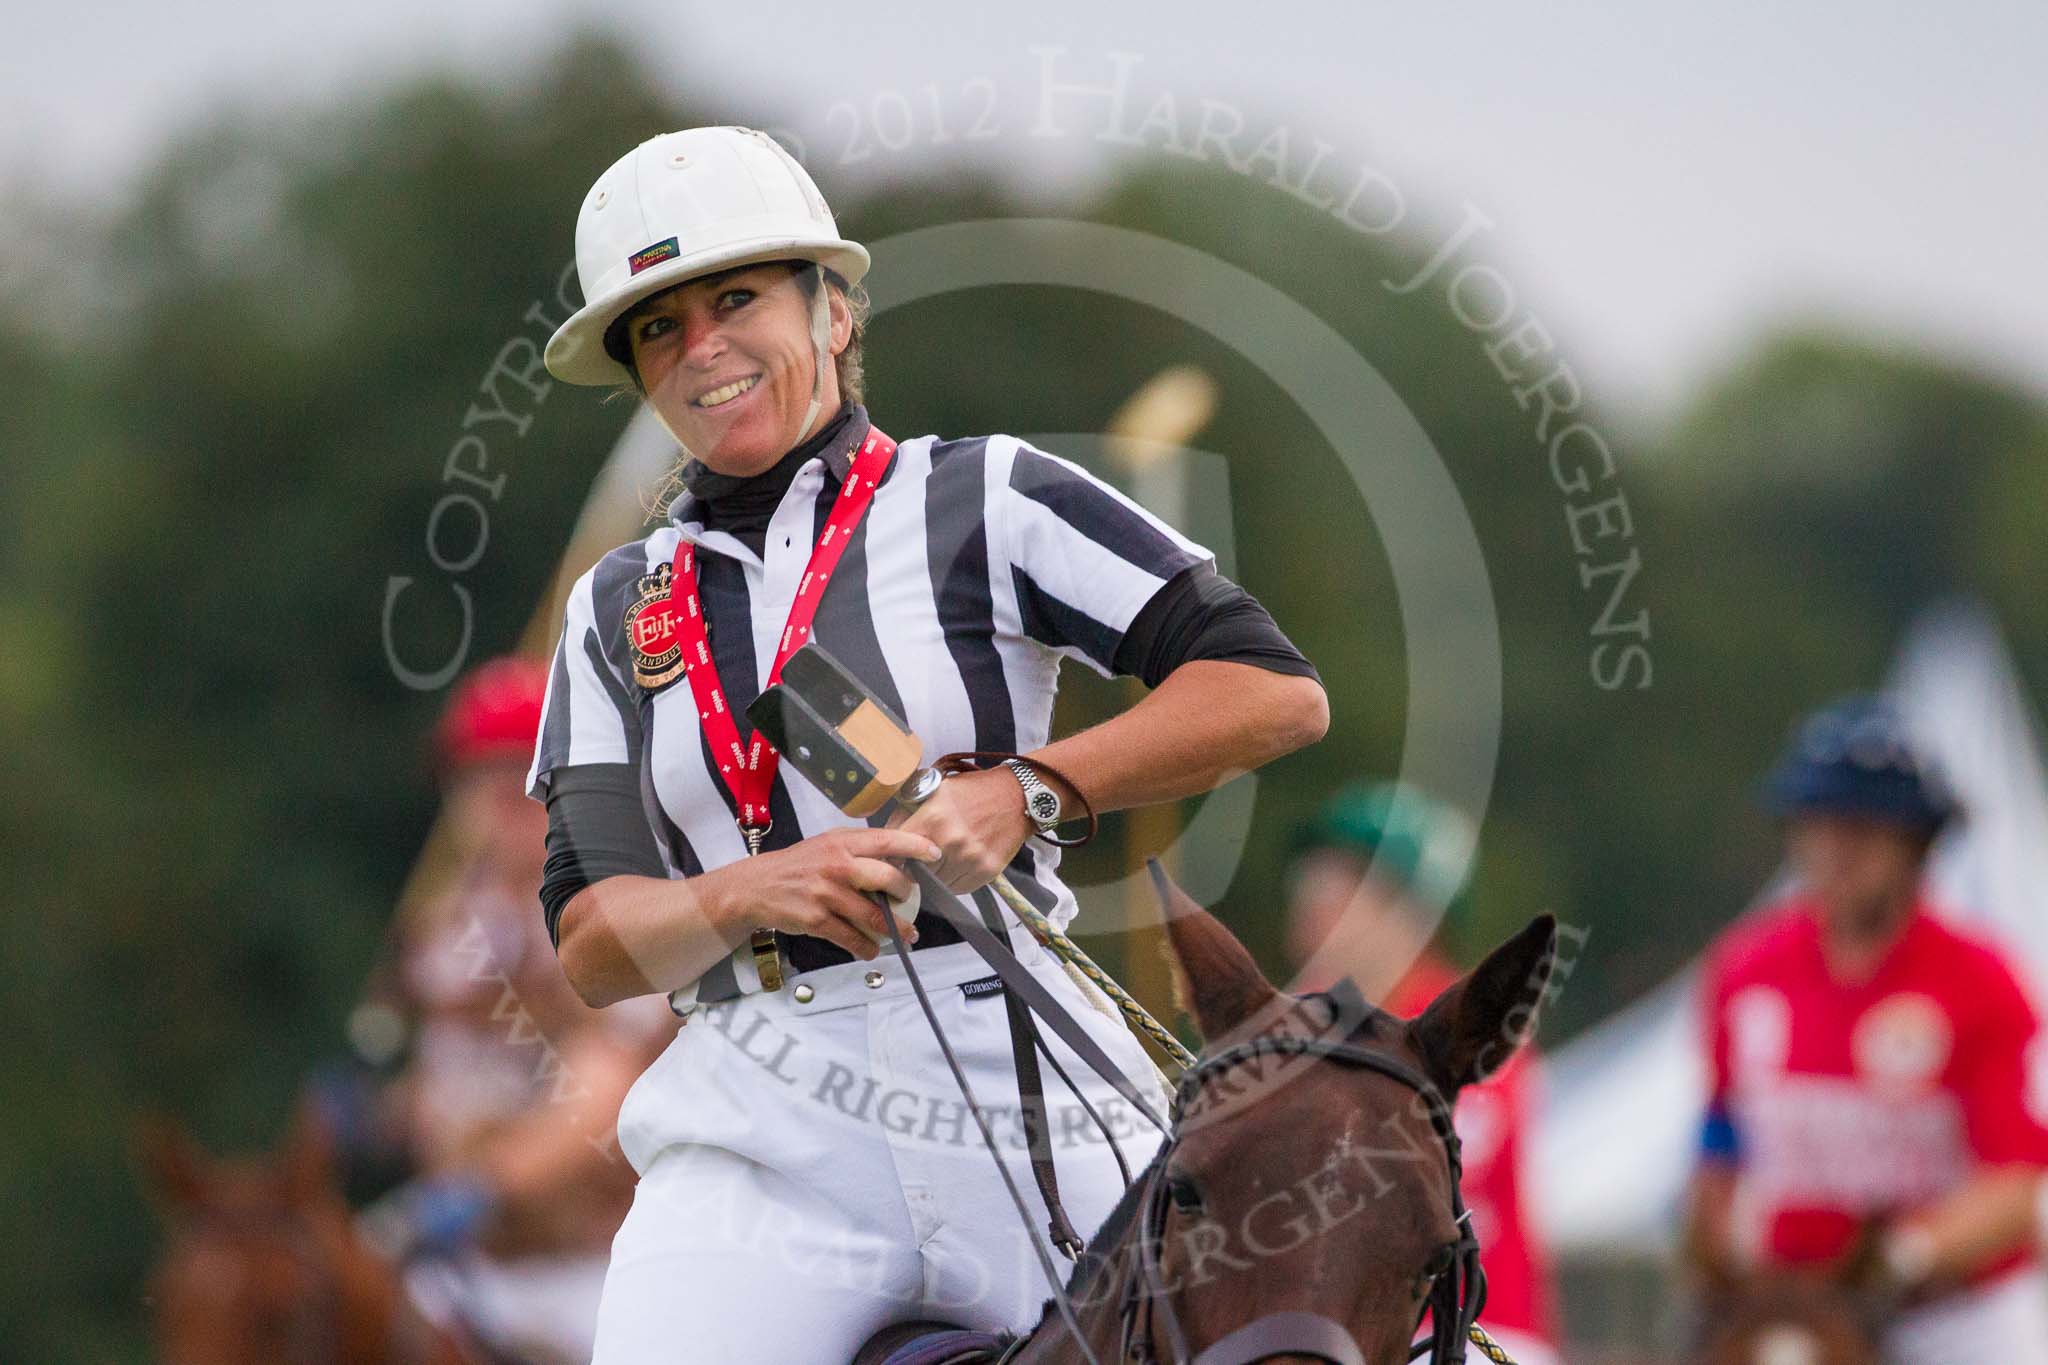 DBPC Polo in the Park 2012: Swiss umpire Barbara Zingg, former Polo Manager of the Royal Military Academy Sandhurst and founder of Heritage Polo..
Dallas Burston Polo Club,
Stoneythorpe Estate,
Southam,
Warwickshire,
United Kingdom,
on 16 September 2012 at 18:57, image #339